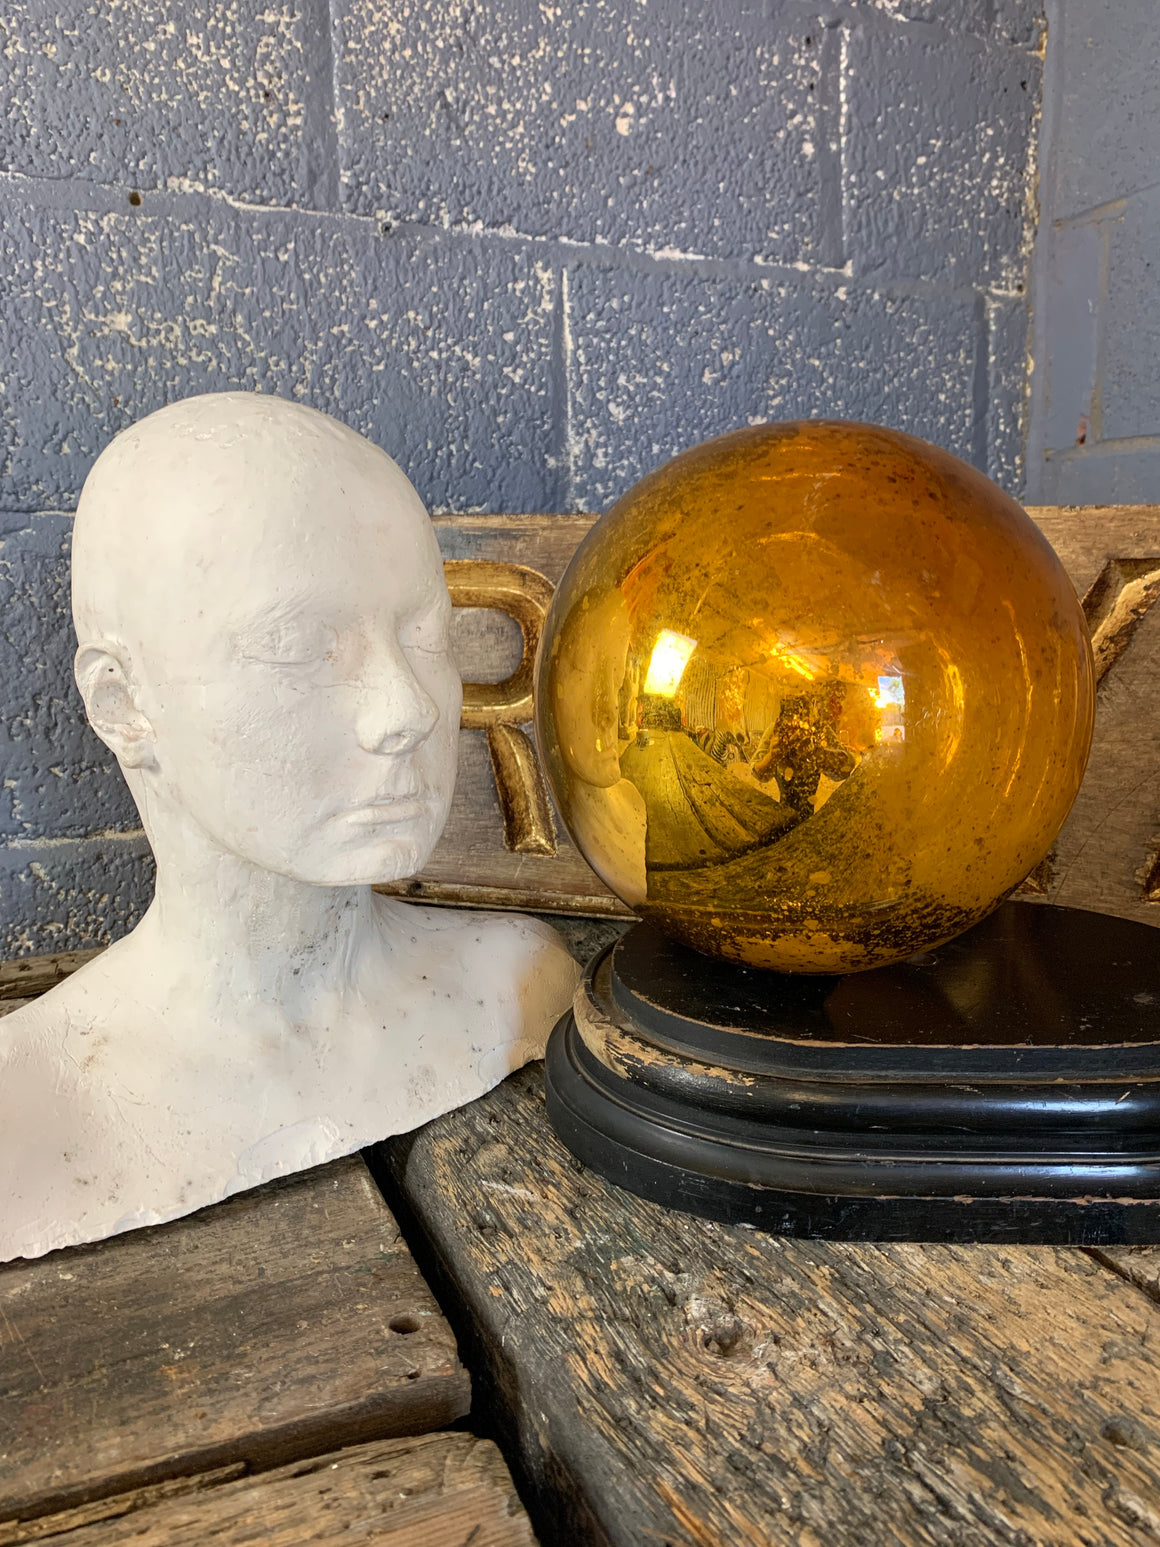 A very large golden mercury glass witches ball